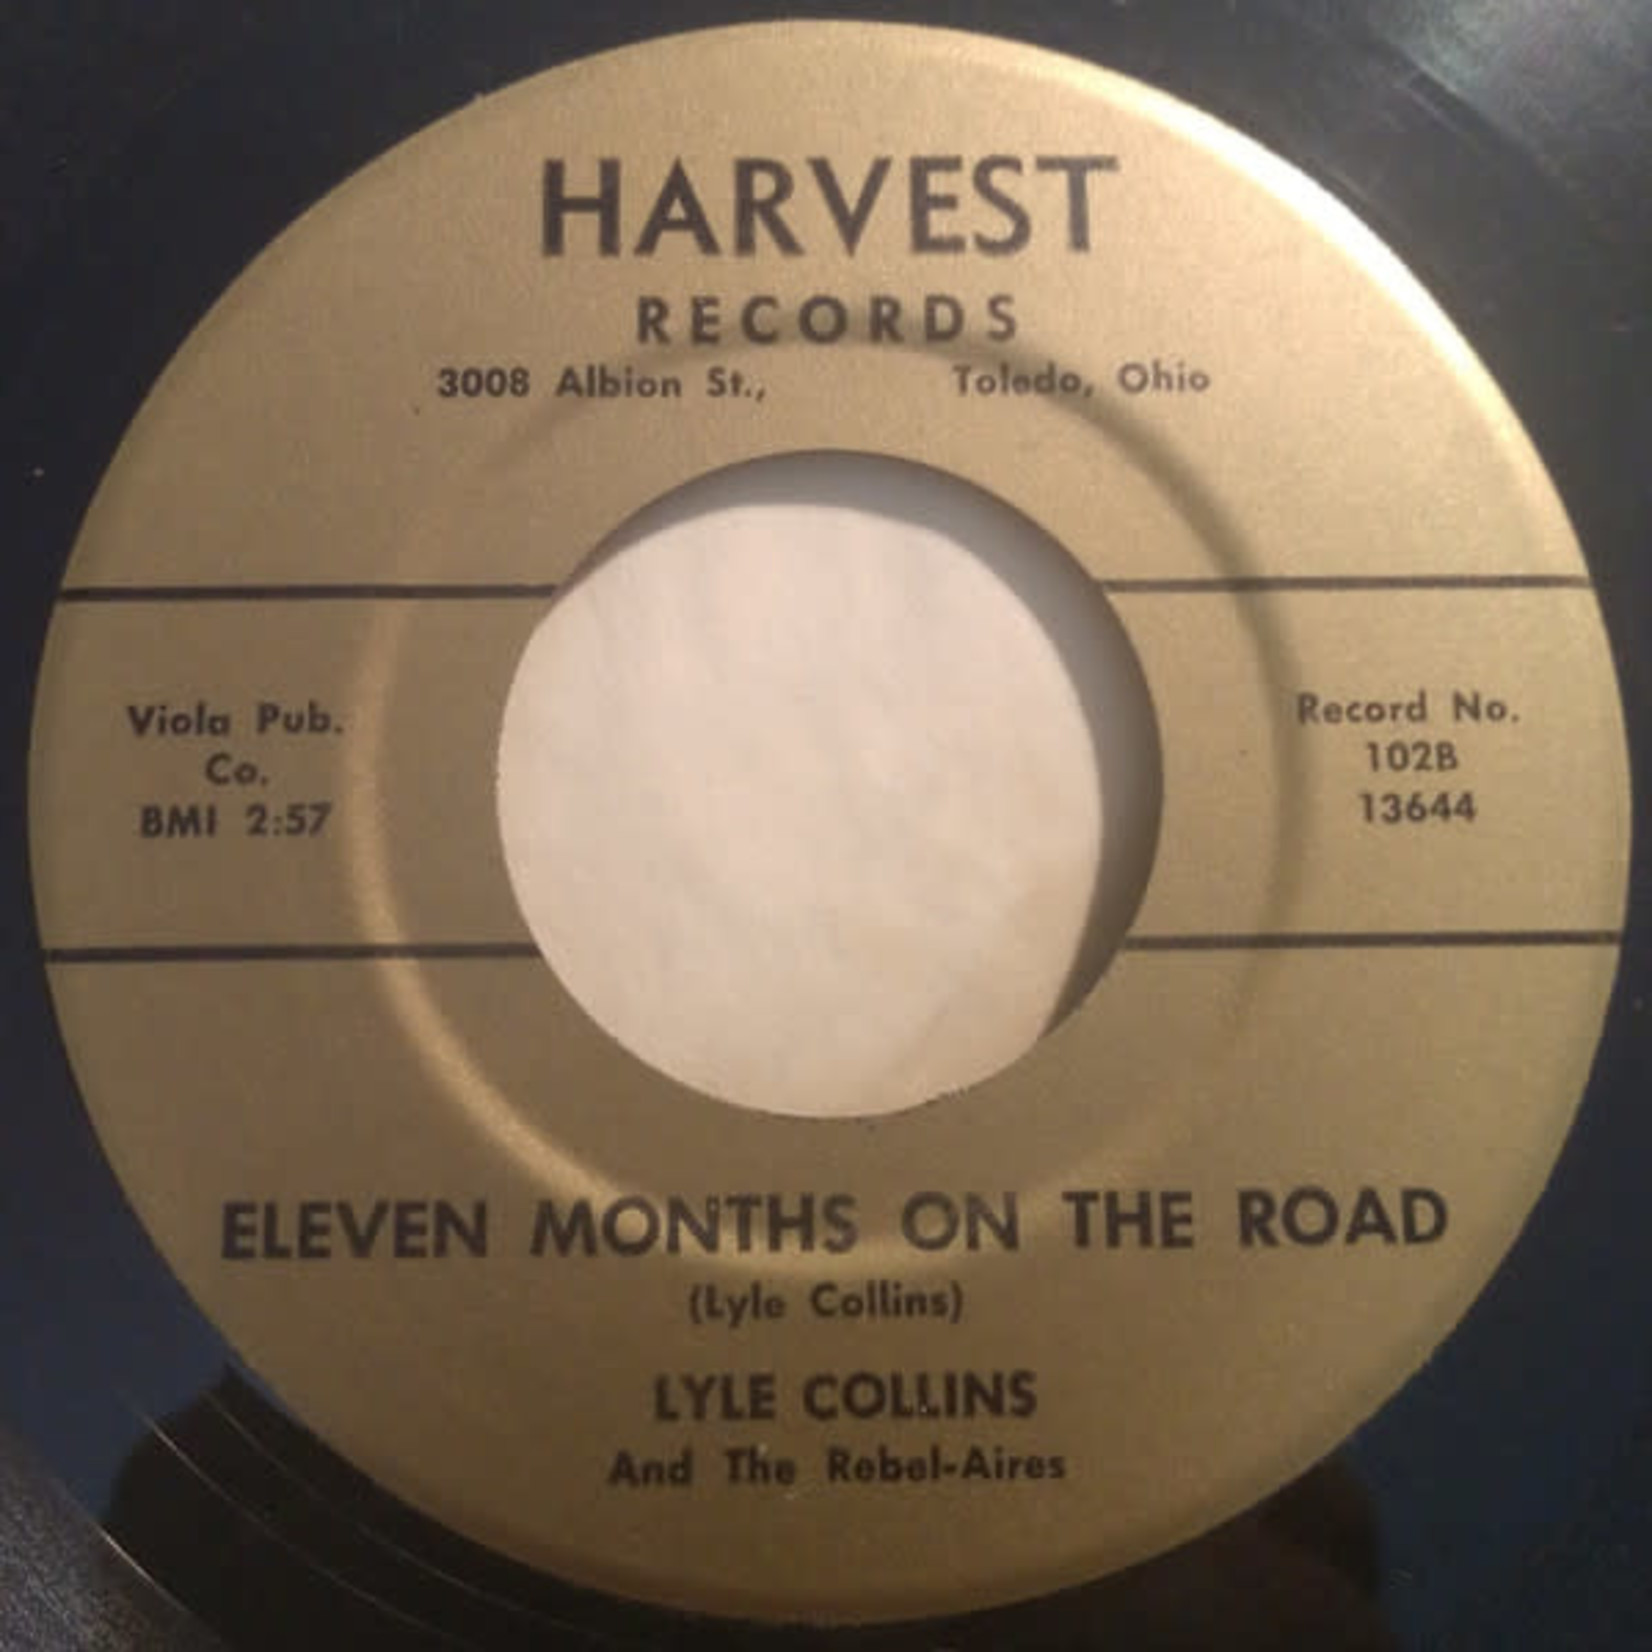 Harvest Lyle Collins And The Rebel-Aires ‎- Johnnycake Mountain Christmastime (7") {G+}